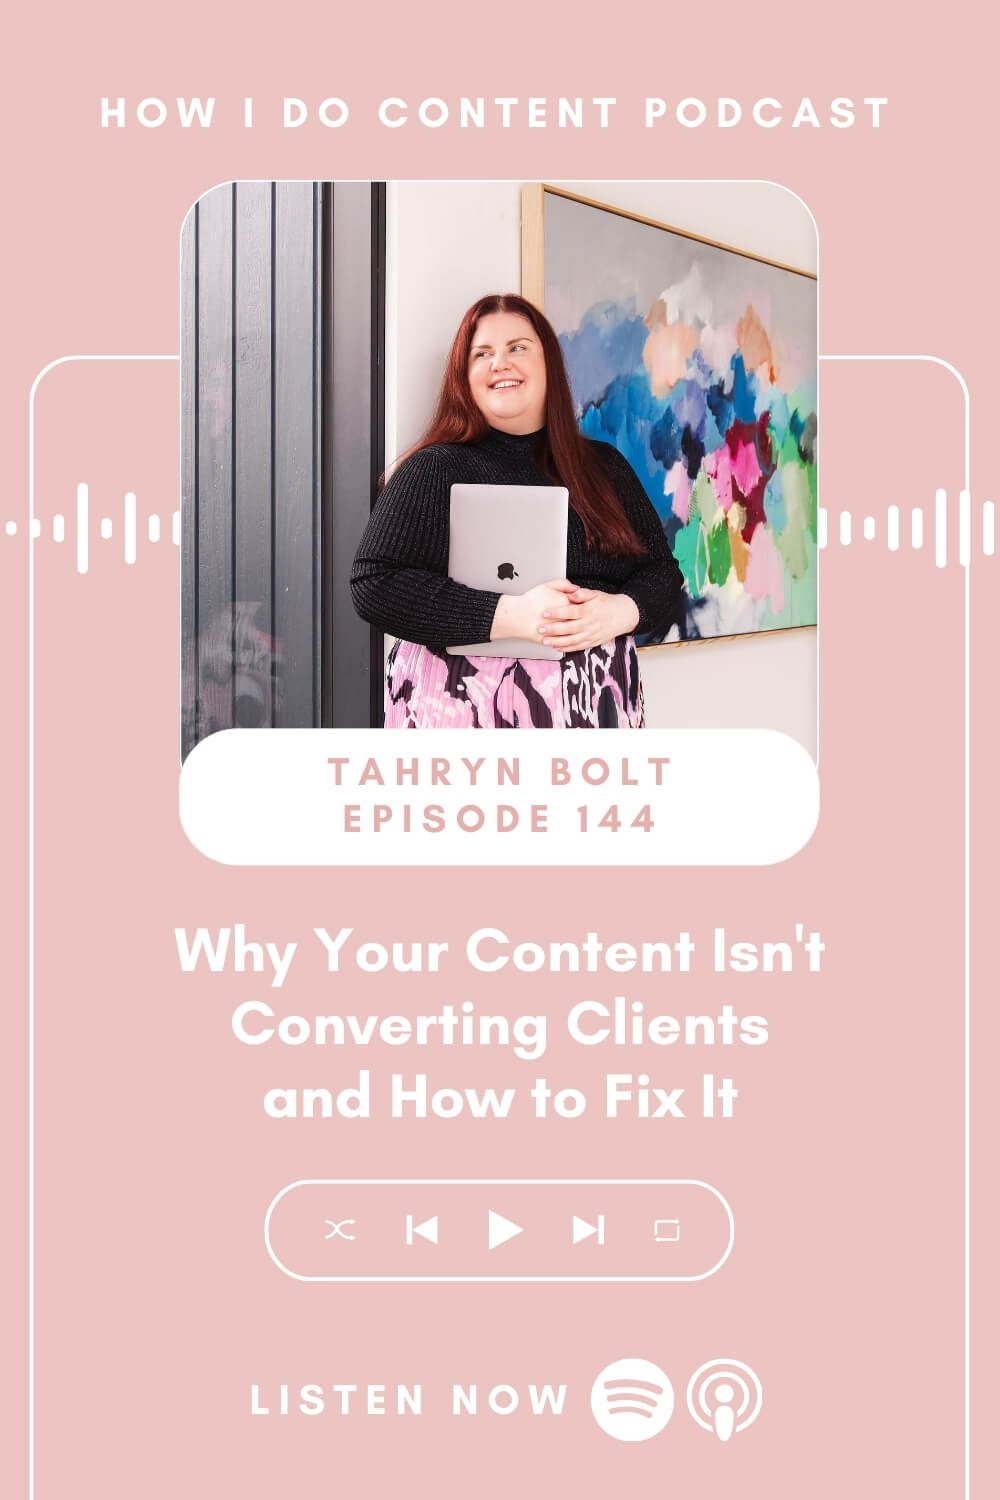 Why Your Content Isn't Converting Clients and How to Fix It